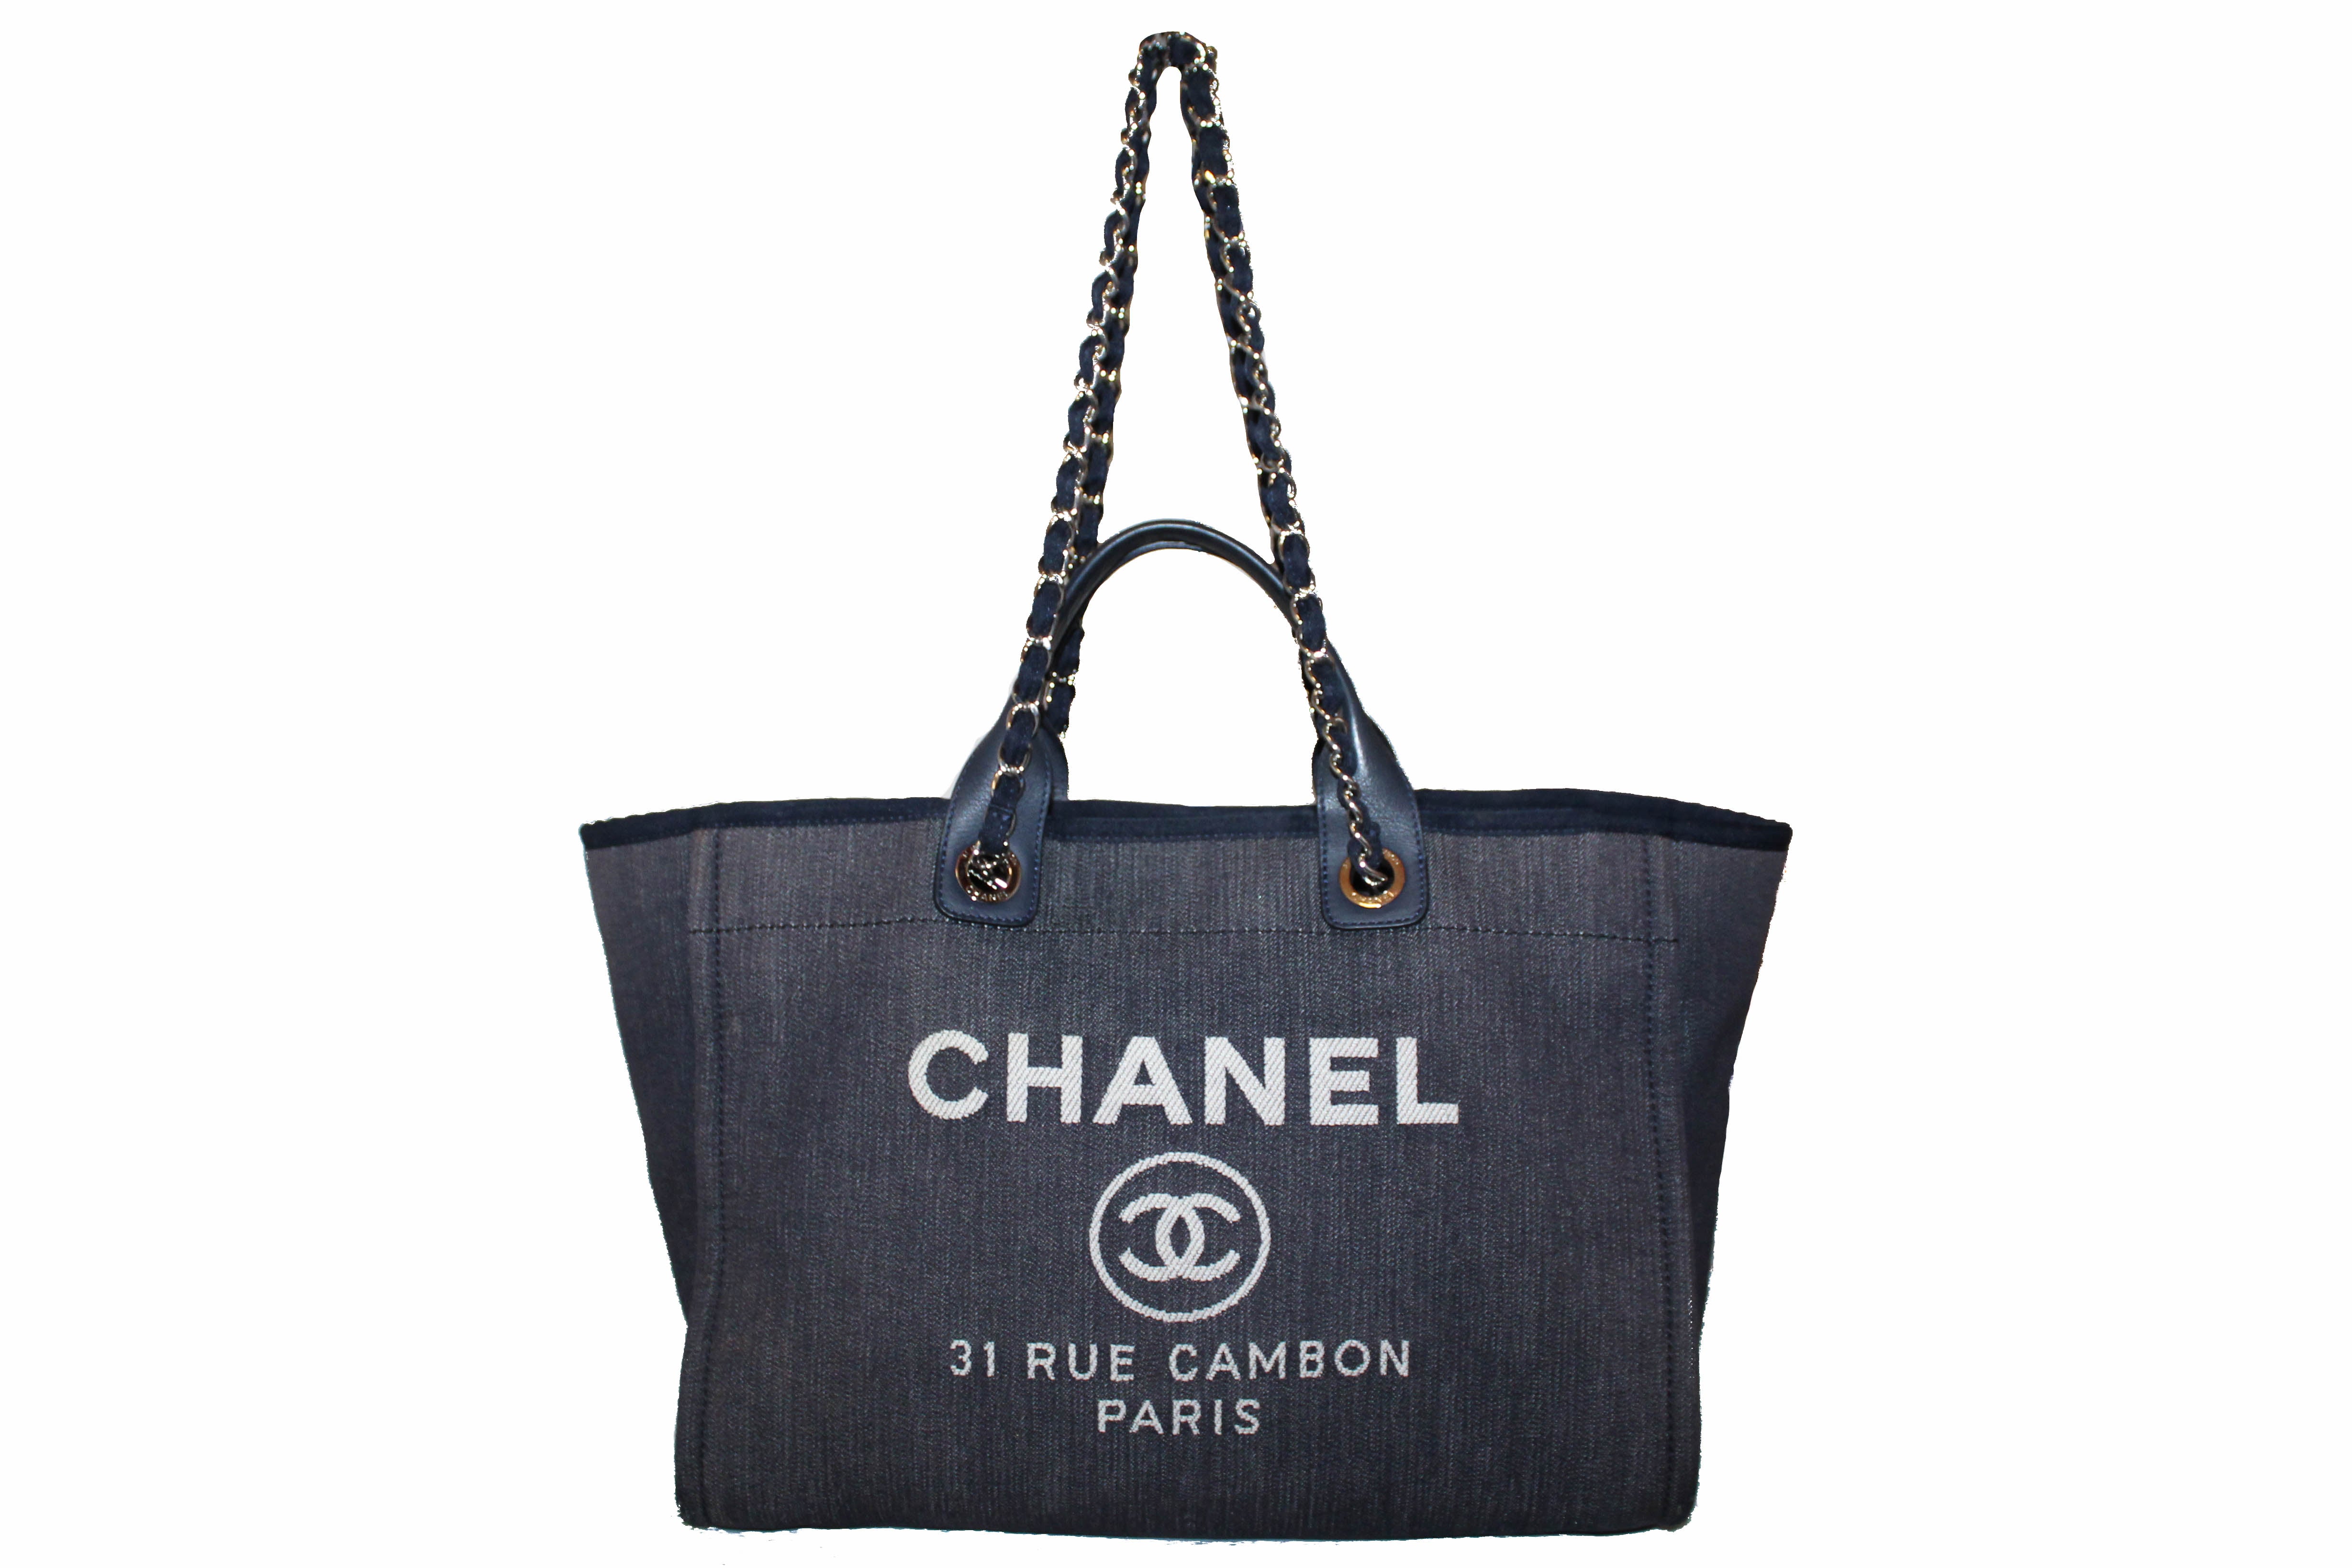 The Complete Guide to the Chanel Deauville Tote Bag - Handbagholic